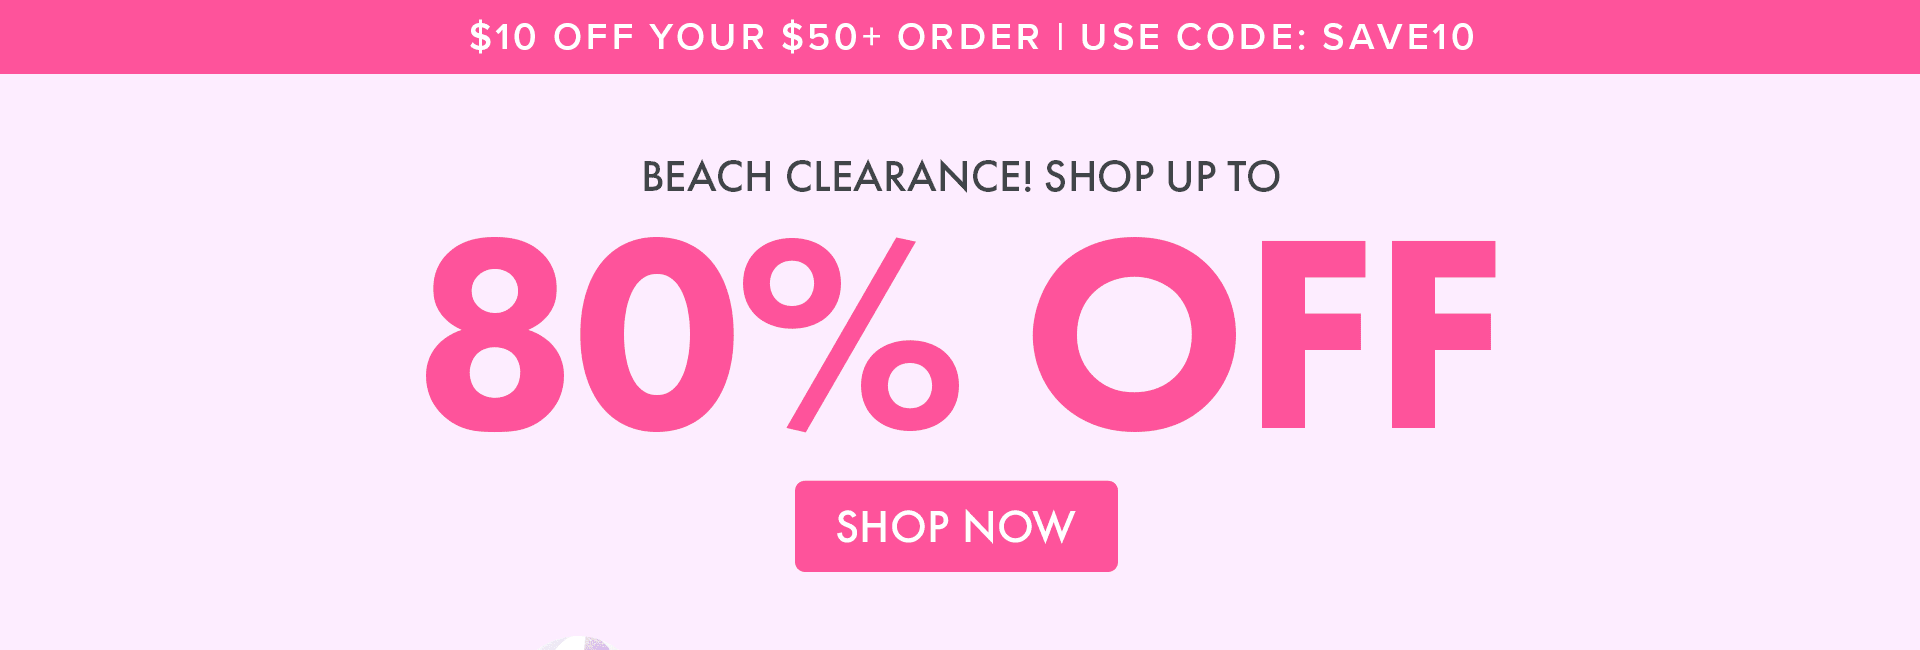 Shop up to 80% OFF!